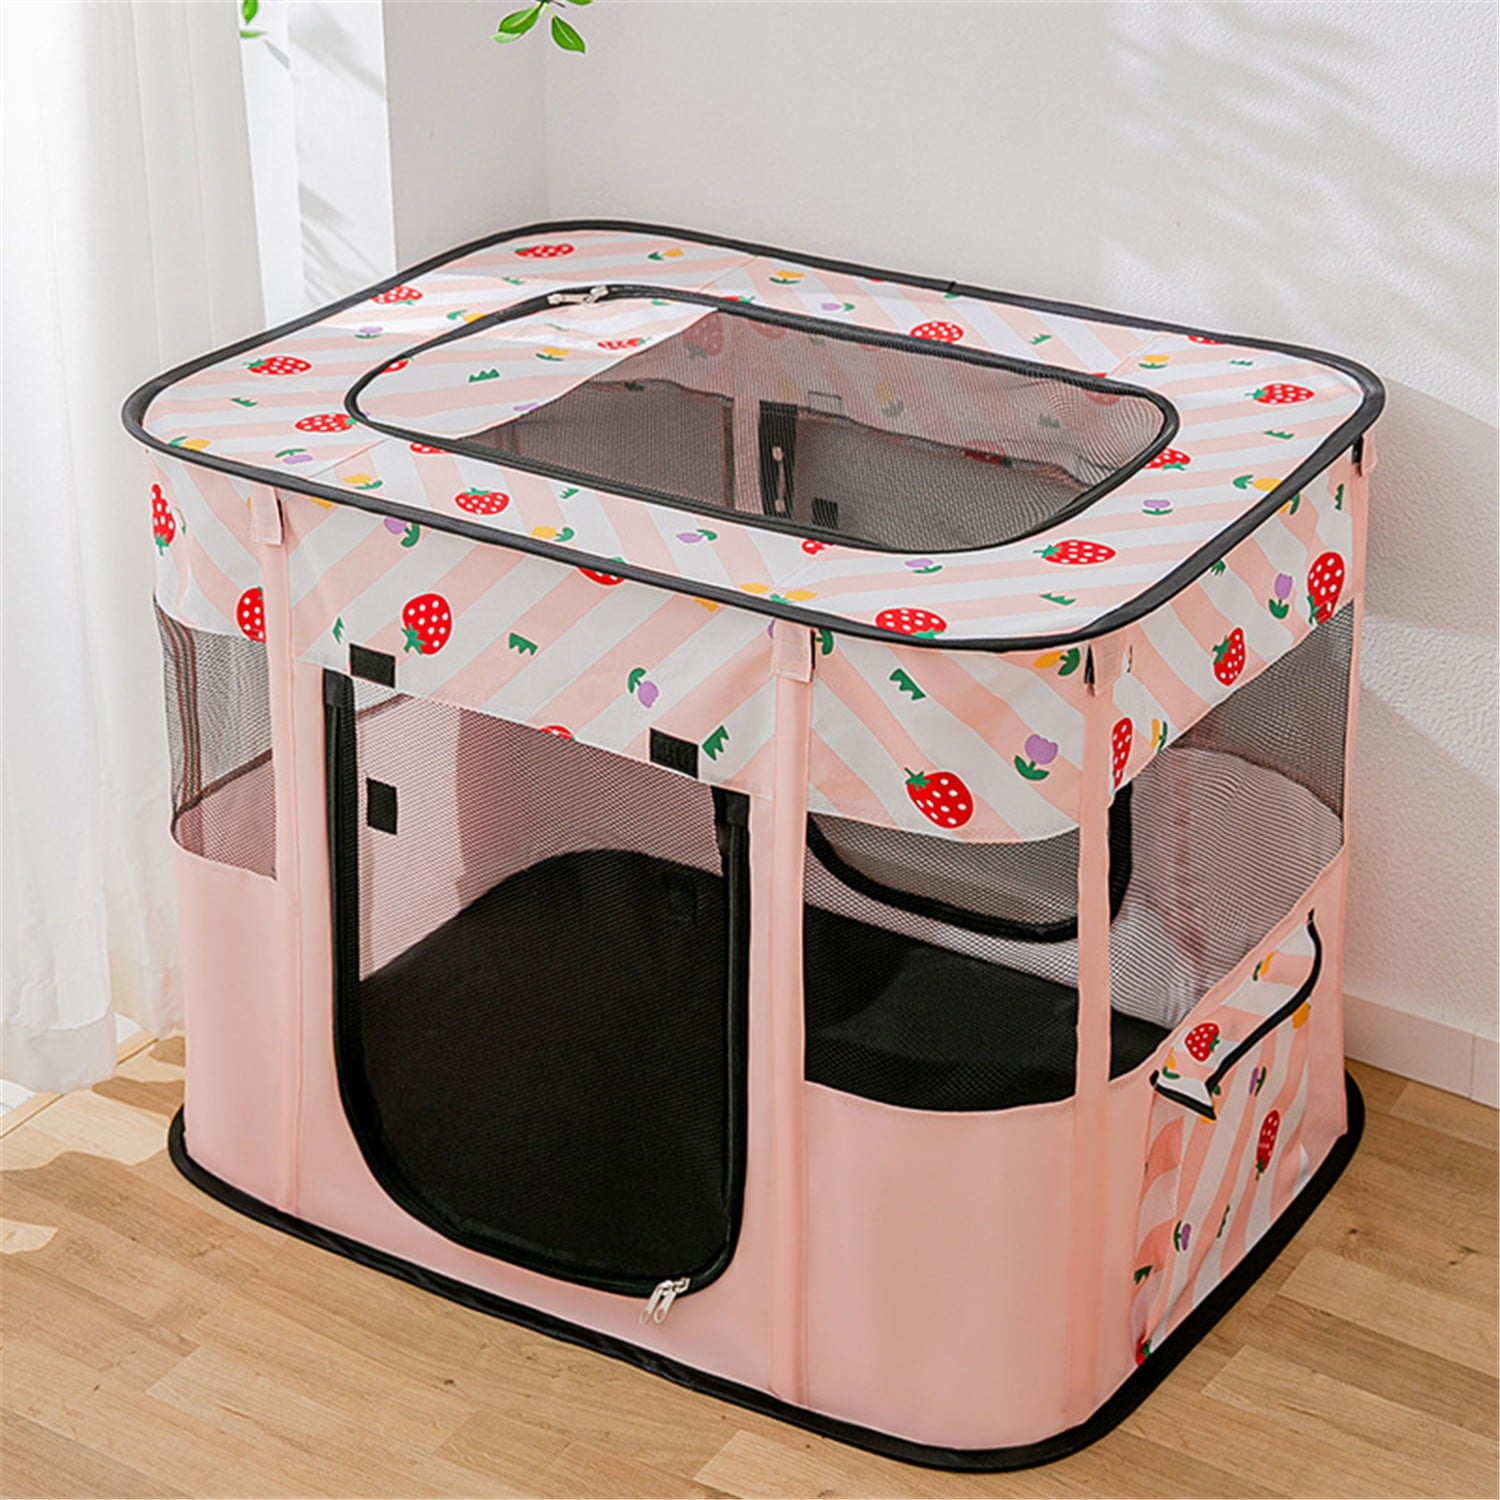 Portable Collapsible Dog Crate， Travel Dog Crate  Foldable for Large Cats and Small Dogs Indoor and Outdoor